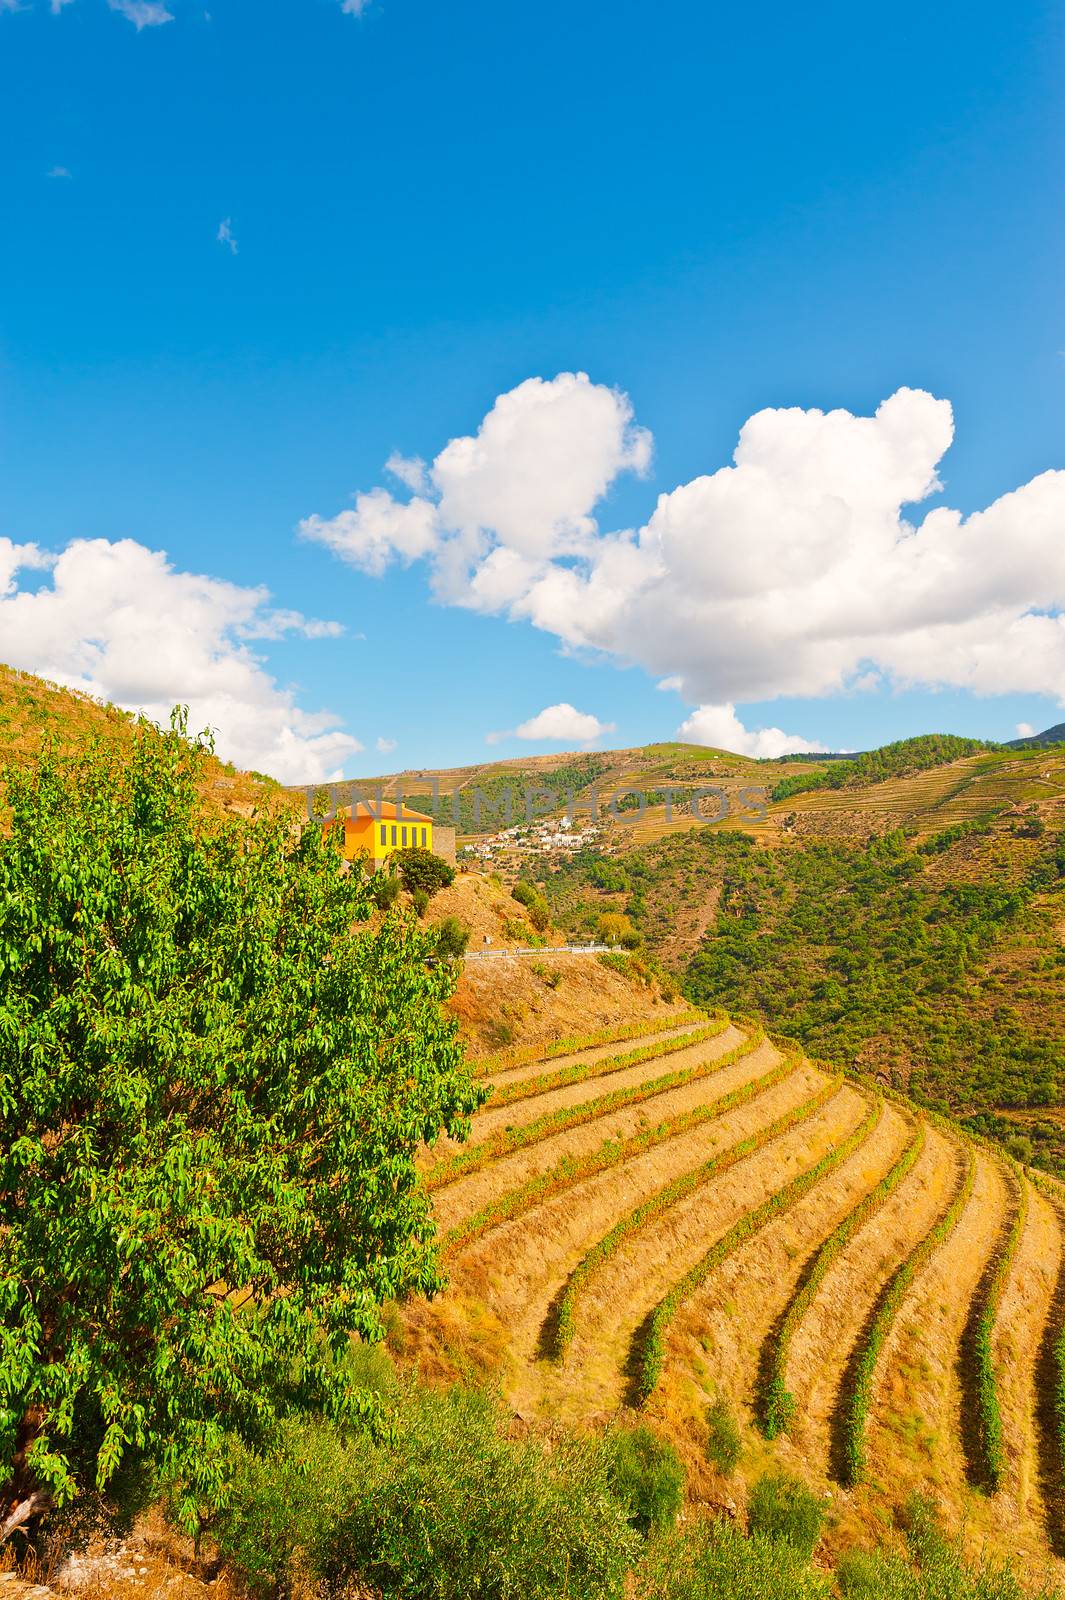 Vineyards on the Hills of Portugal